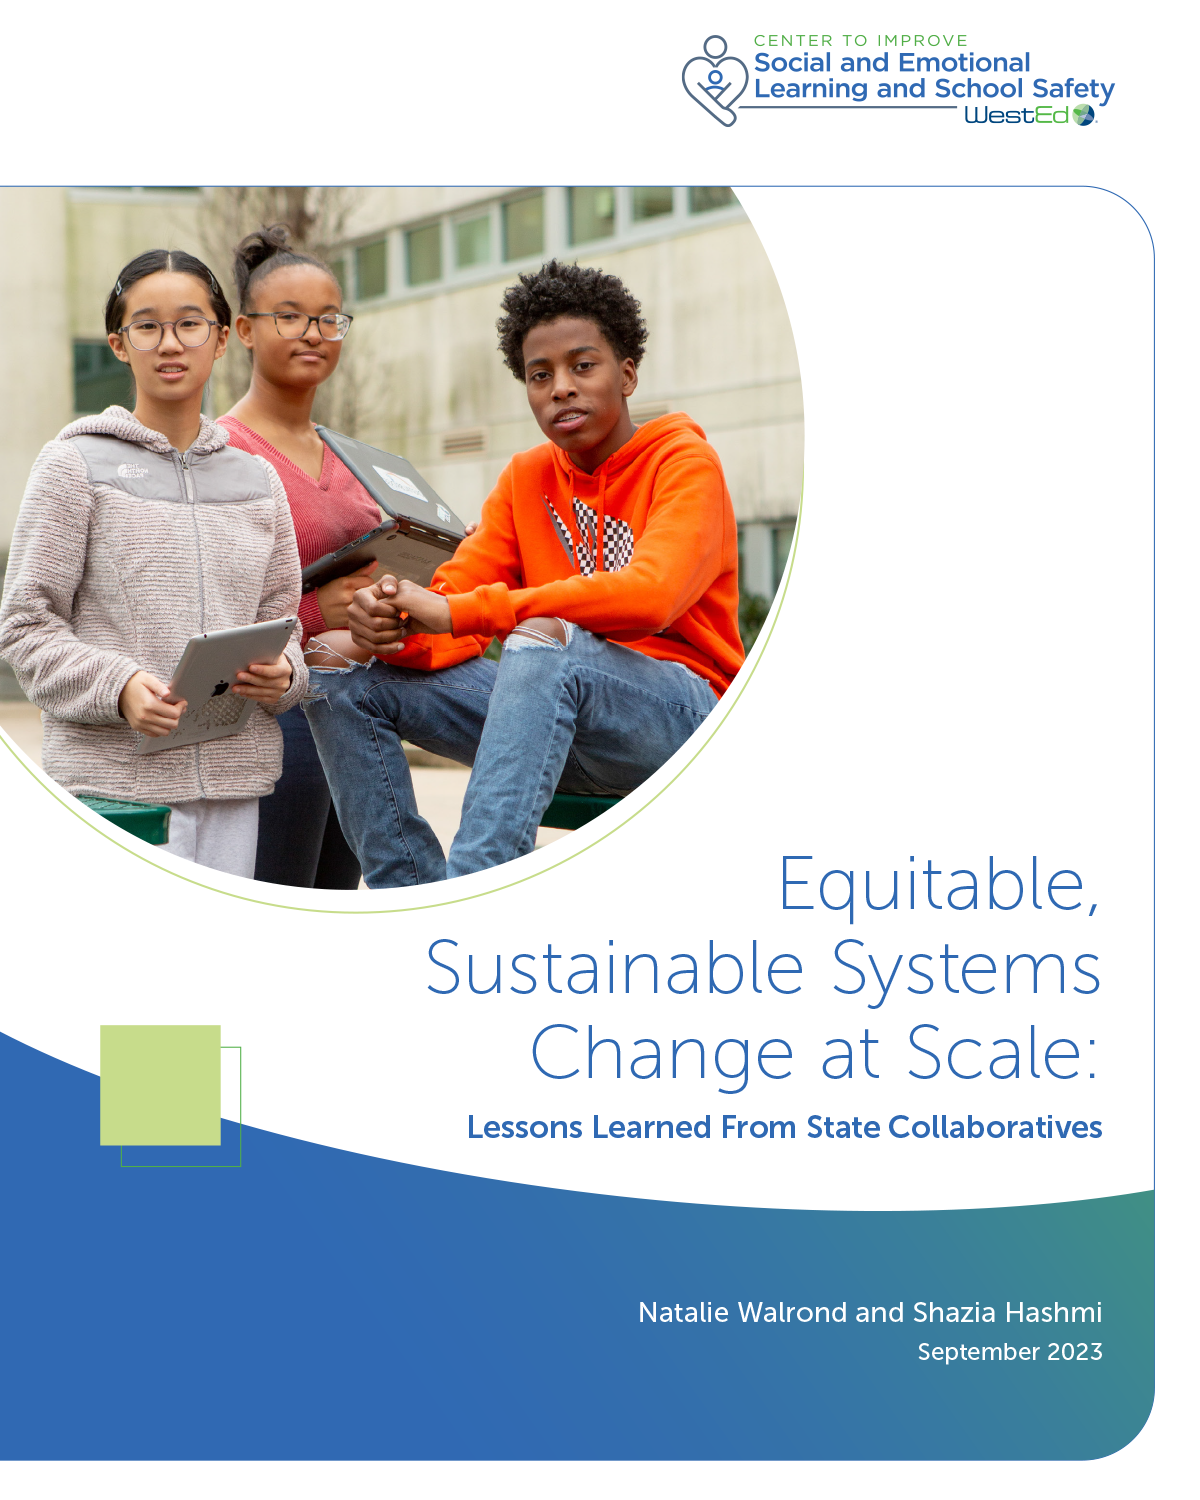 Equitable Sustainable Systems Change at Scale: Lessons Learned from State Collaboratives